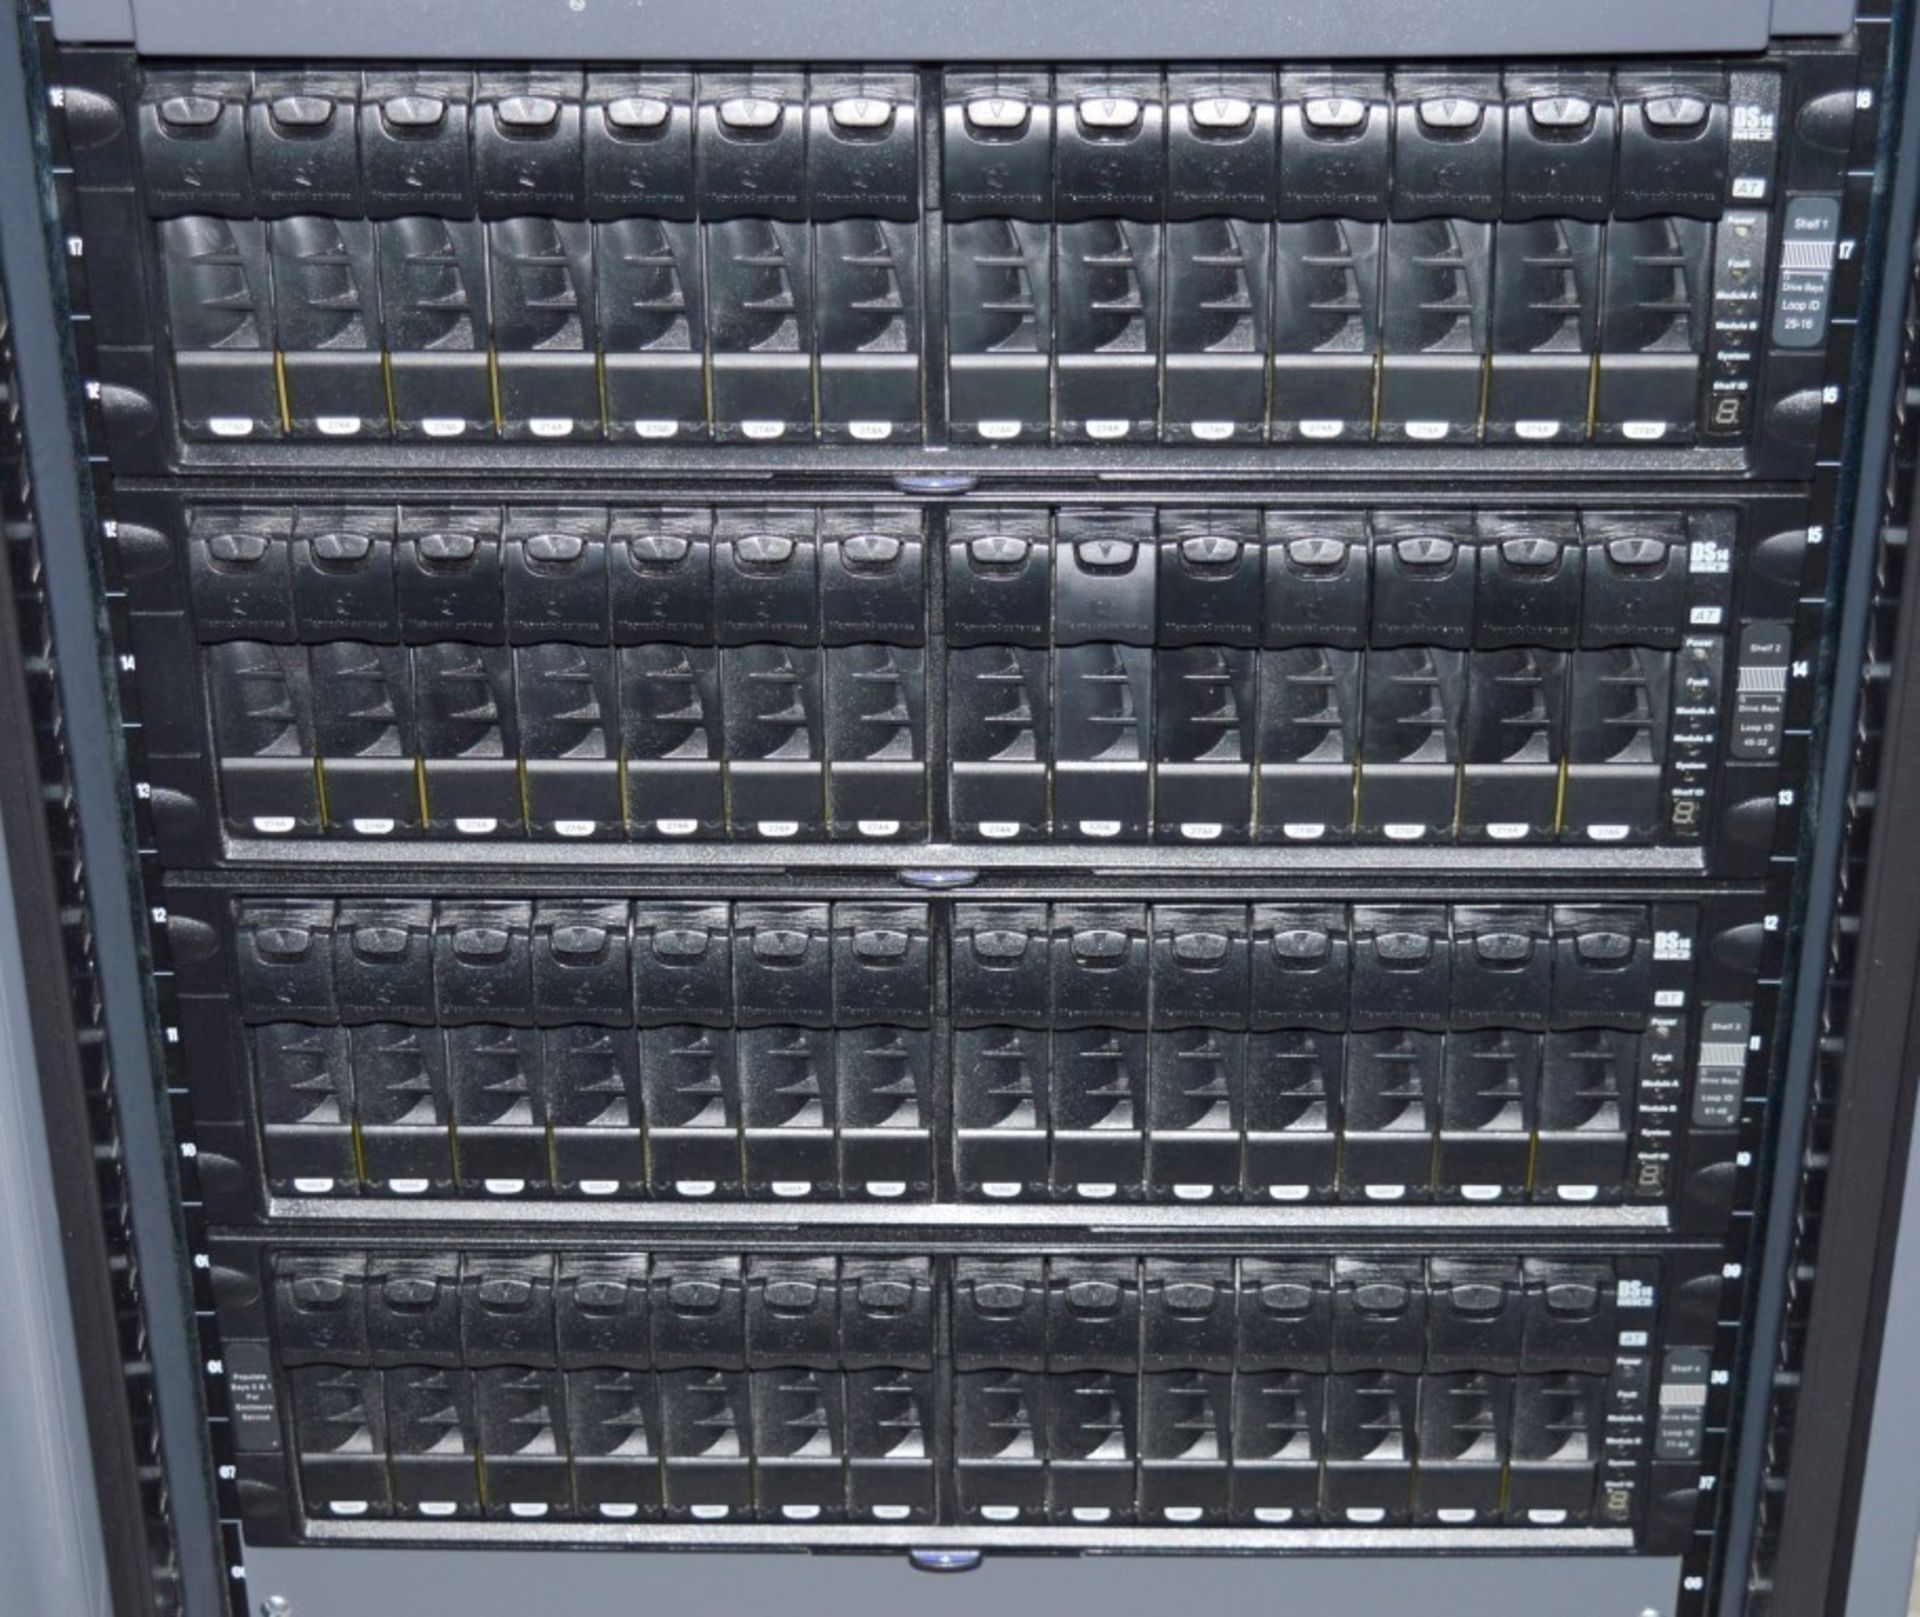 1 x Network Appliance Netapp Filer - Netapp Data Rack With 1 x FAS3140 Controller and 9 x DS14 MK2 - Image 3 of 23